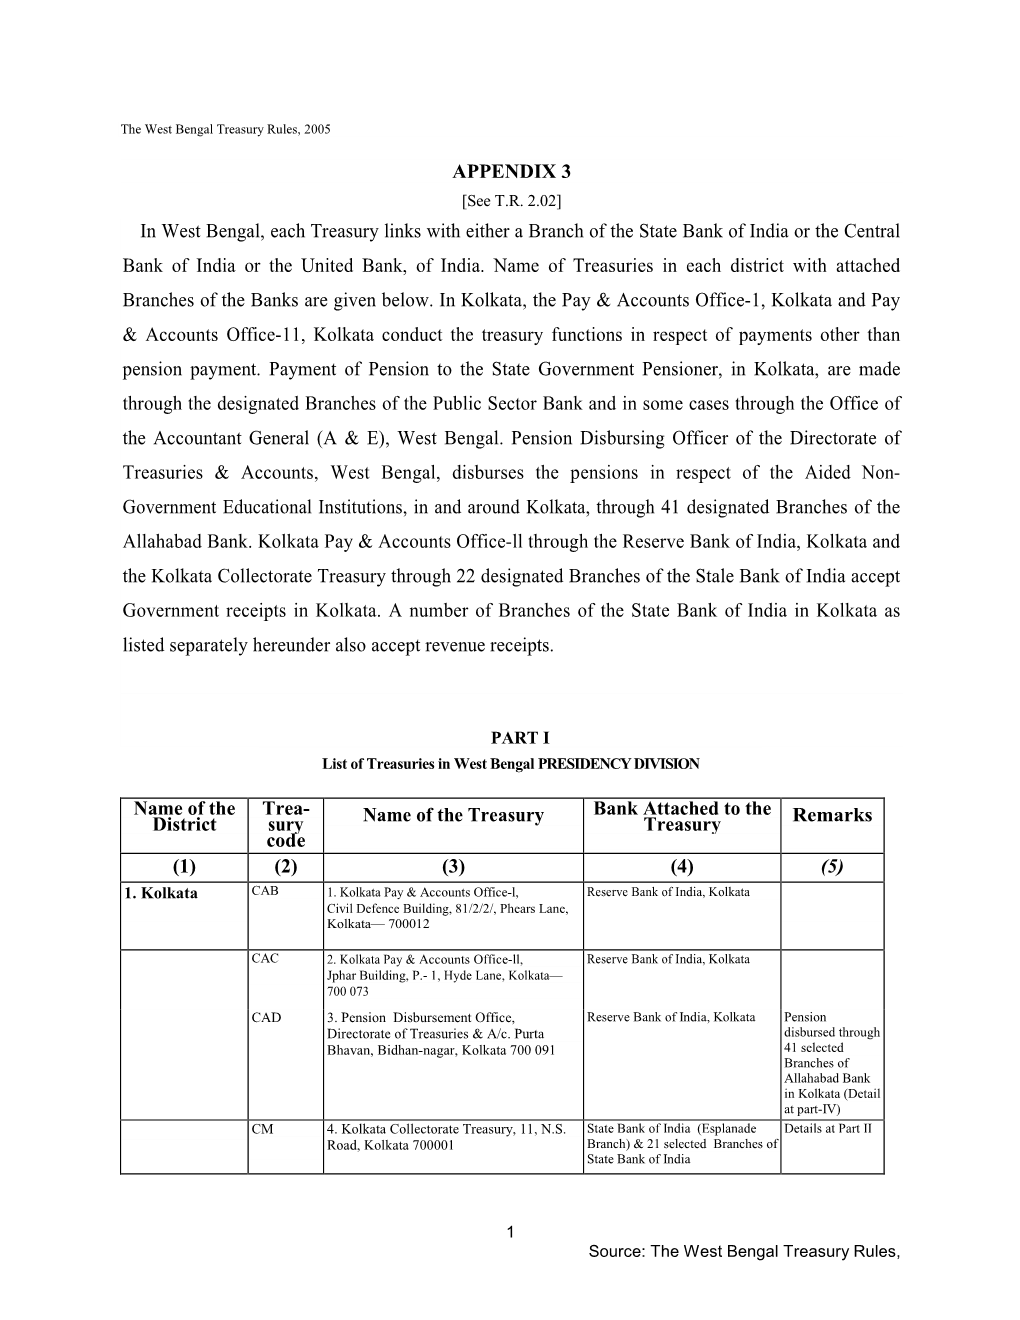 APPENDIX 3 in West Bengal, Each Treasury Links with Either a Branch